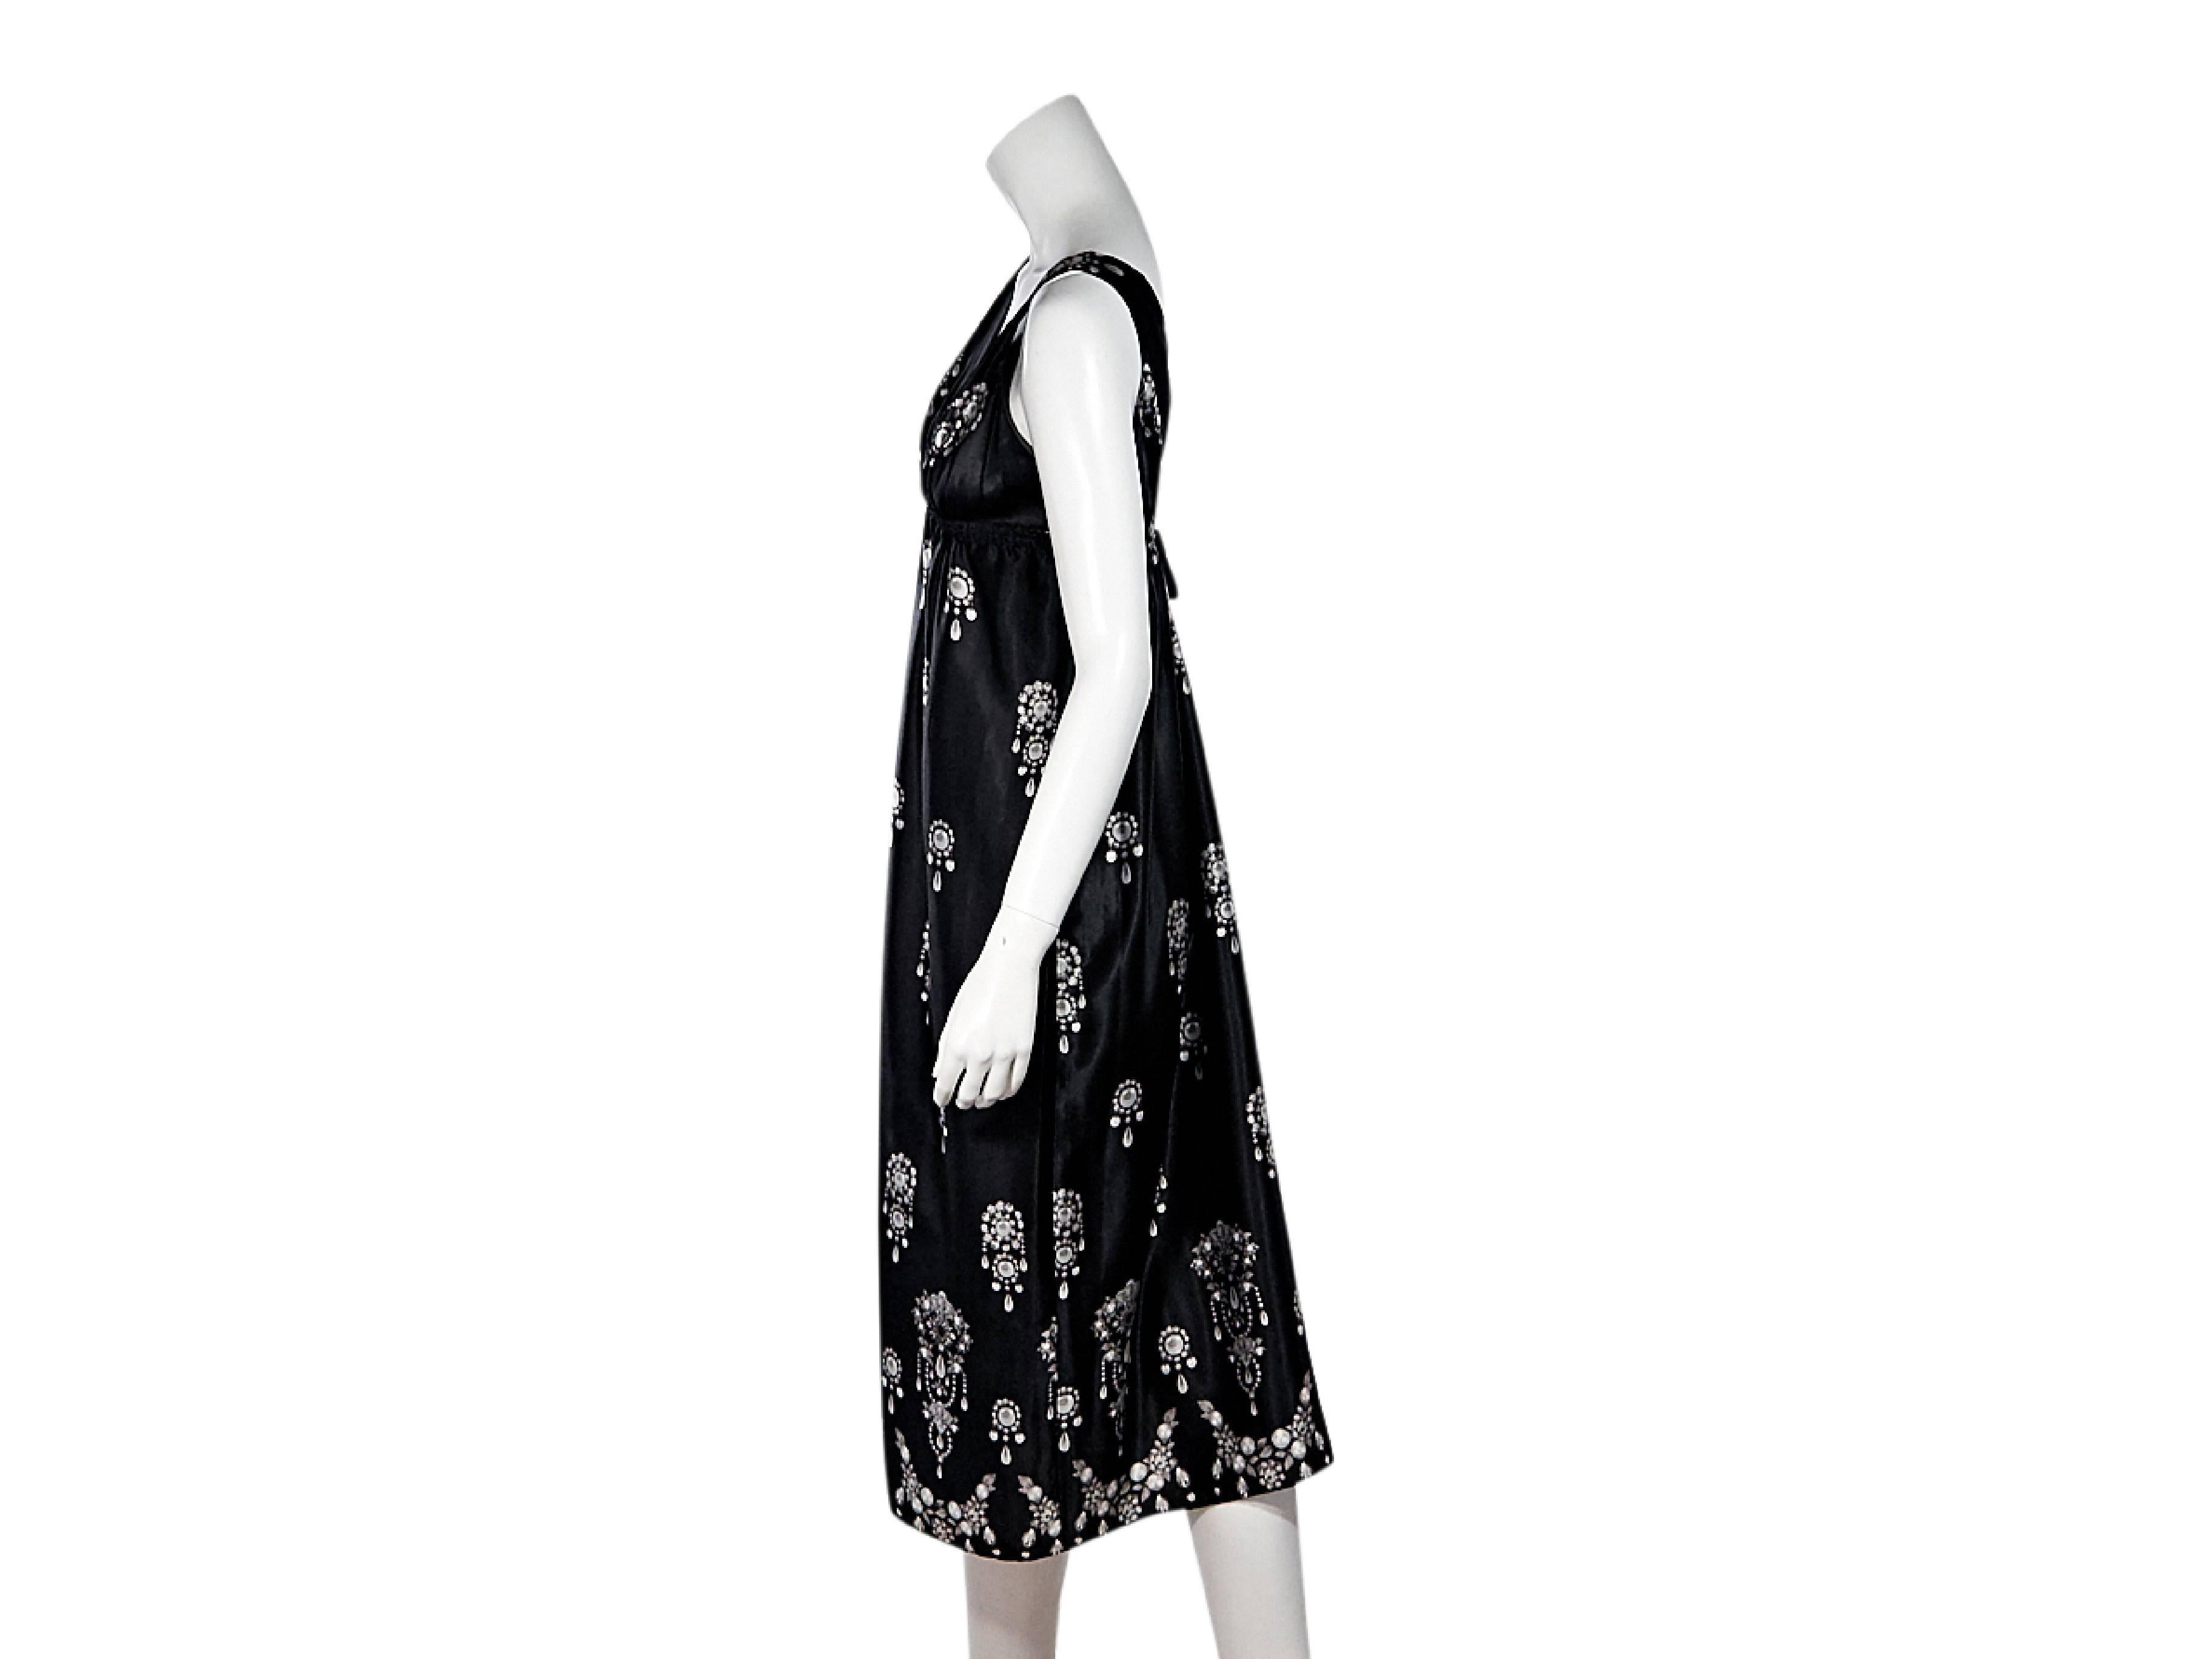 Product details:  Black jewel-printed silk midi dress by Oscar de la Renta.  Double v-neck.  Sleeveless.  Empire waist with self-tie back.  Pullover style.
Condition: Pre-owned. Very good.
Est. Retail $ 998.00